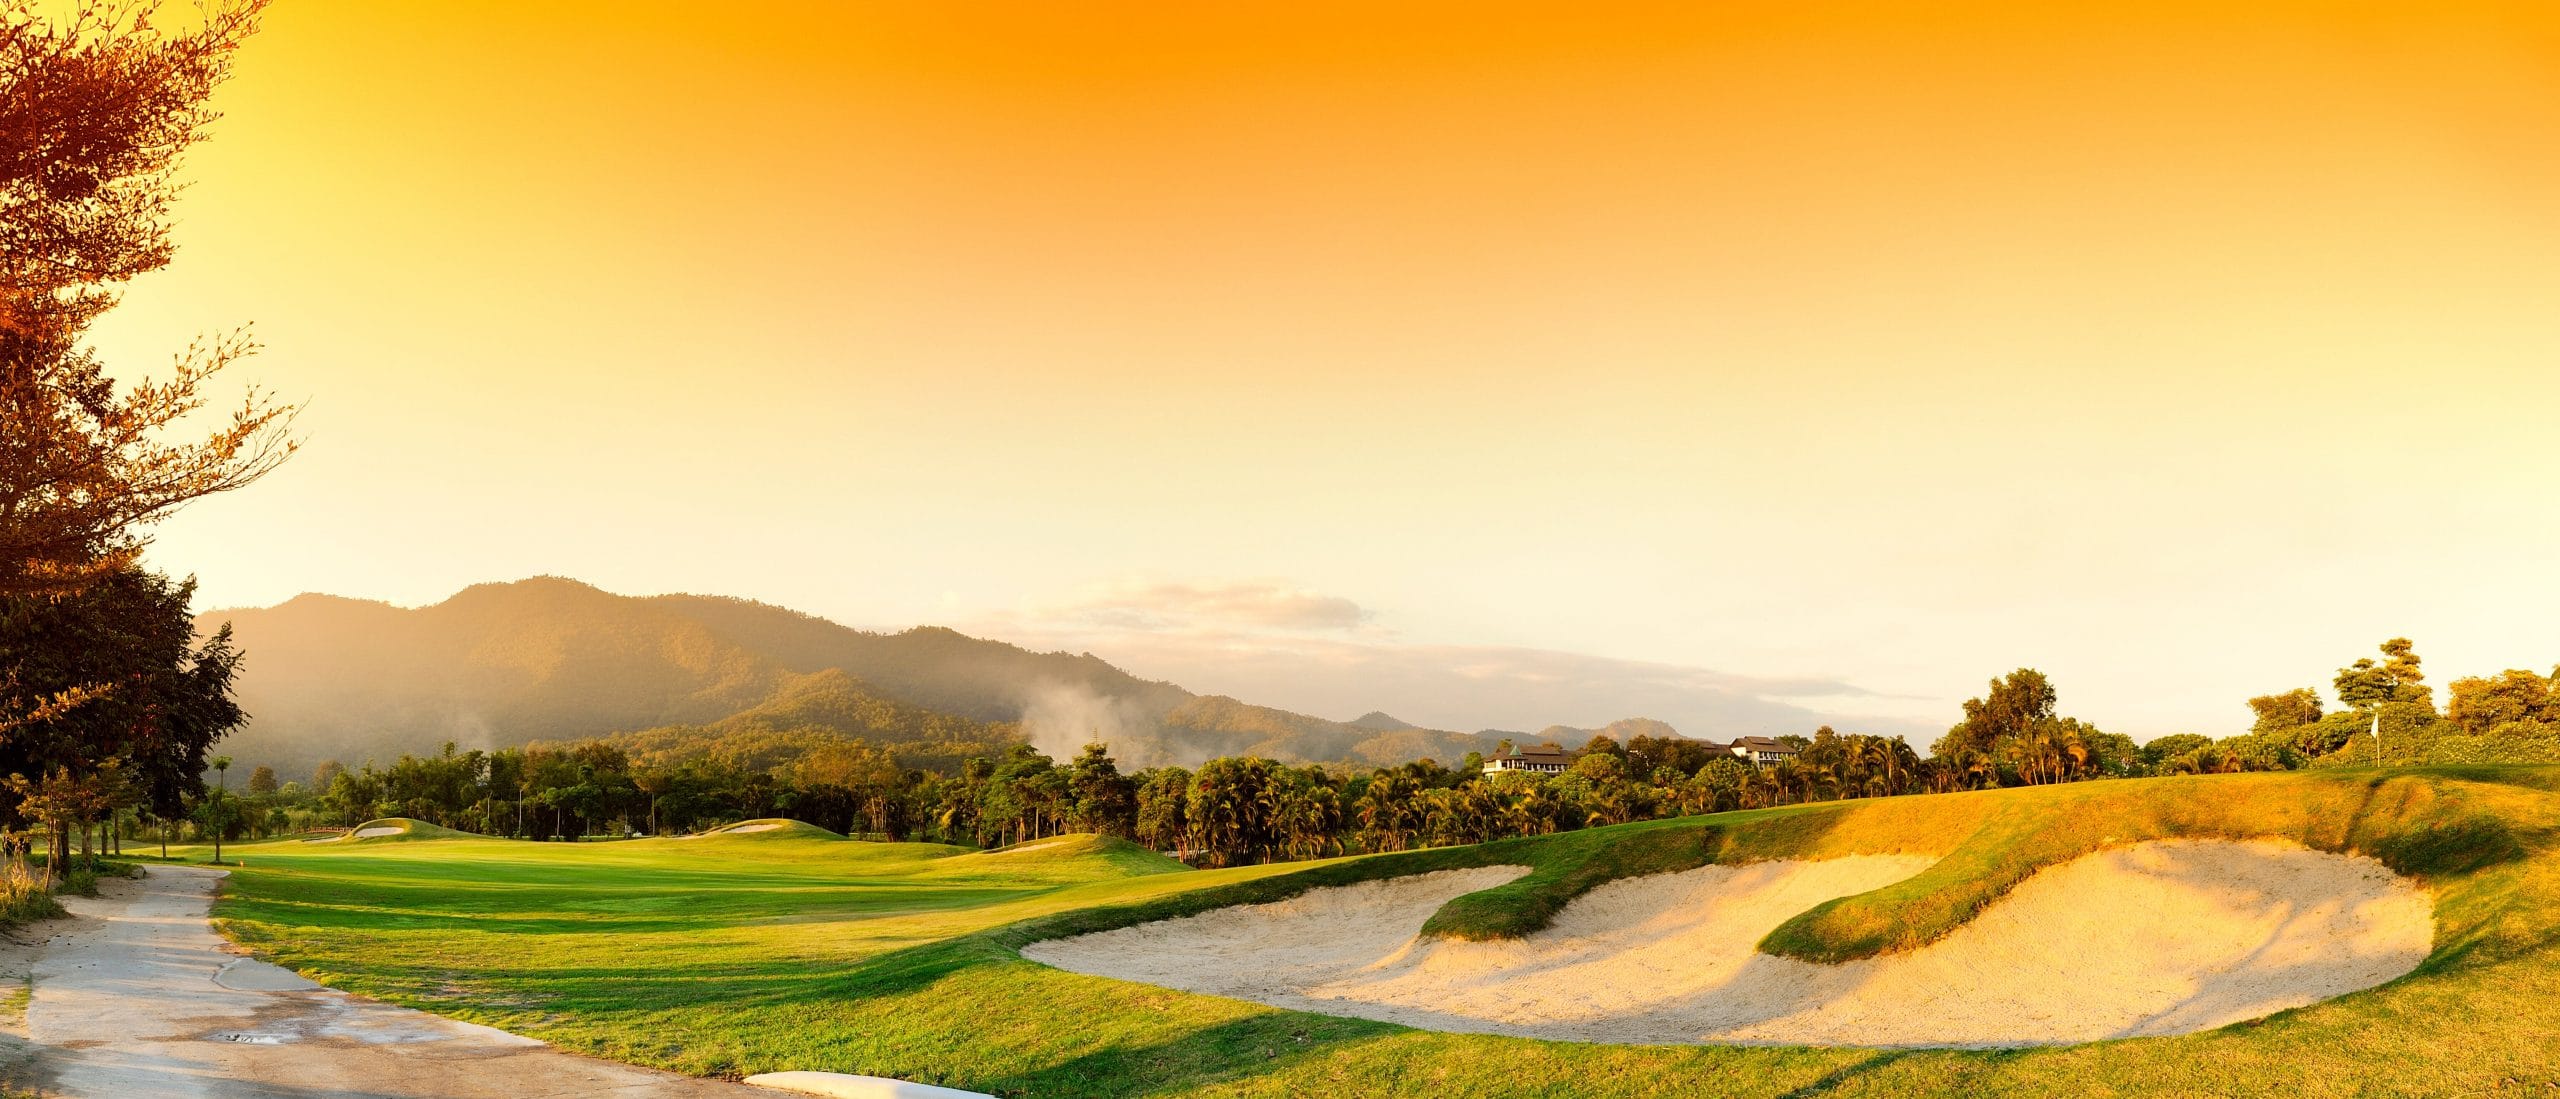 Golf Course At Sunset With Mountains In Background